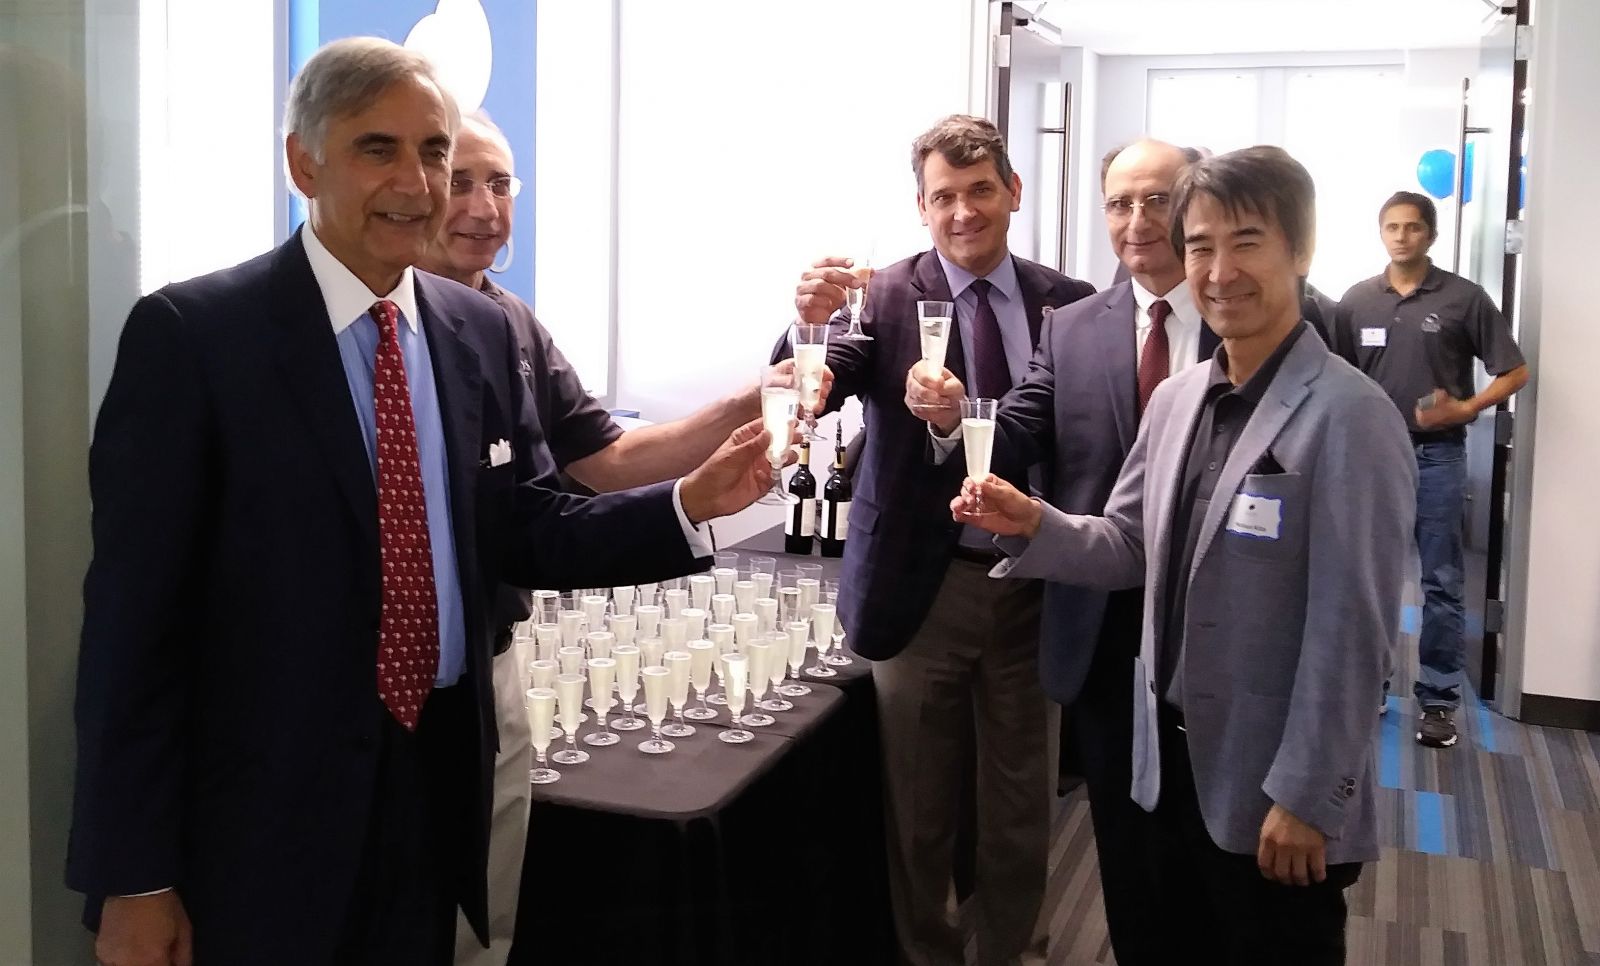 From left: University of South Carolina President Harris Pastides, Jerry Melnick, president and CEO of SIOS Technology, Bill Kirkland, executive director of USC's Office of Economic Engagement, Hossein Haj-Hariri, dean of the College of Engineering and Computing and Nobuo Kita, chairman of Board of Directors for SIOS Technology, share a glass of champagne at the ribbon cutting of SIOS Techonlogy's new research and development center on the campus of USC.